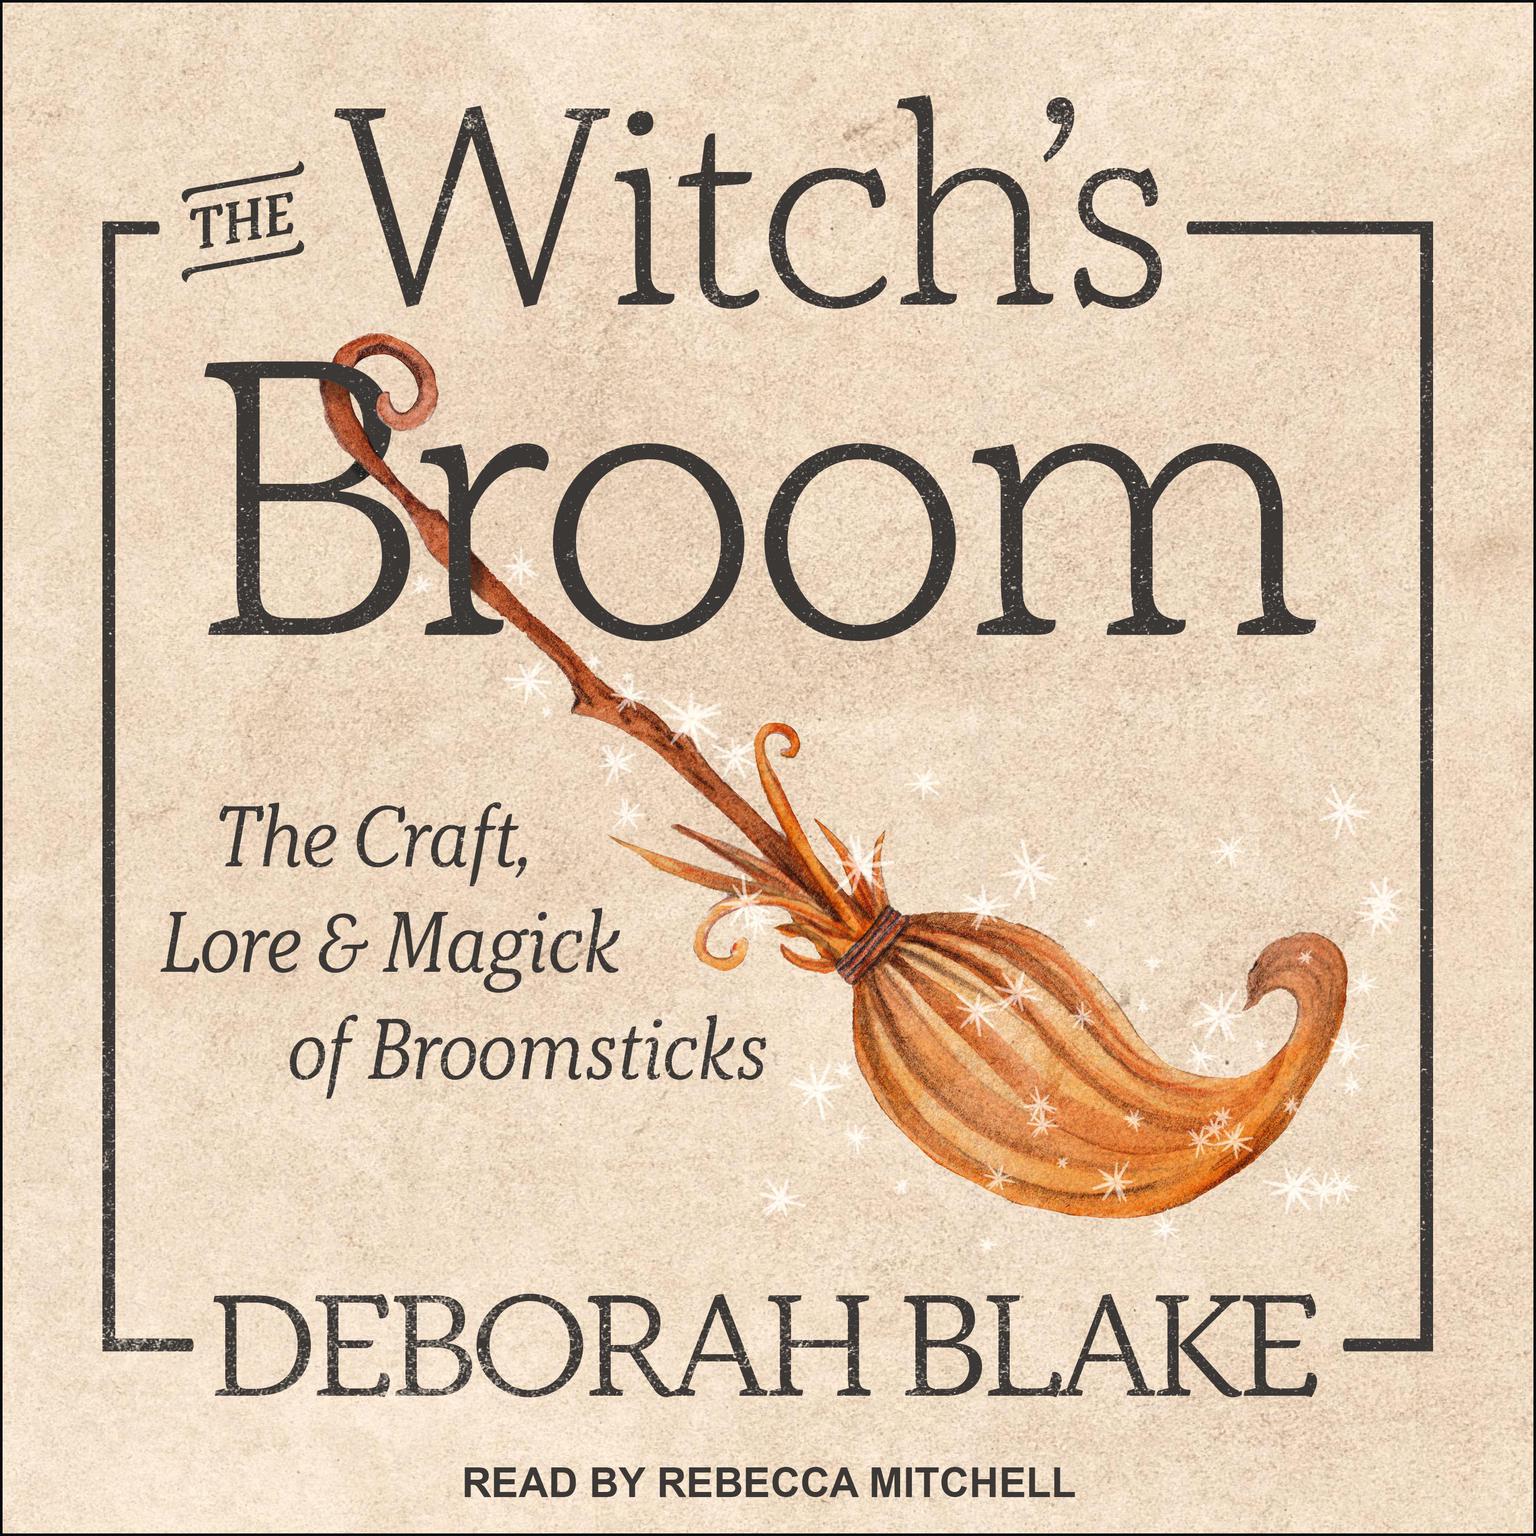 The Witchs Broom: The Craft, Lore & Magick of Broomsticks Audiobook, by Deborah Blake